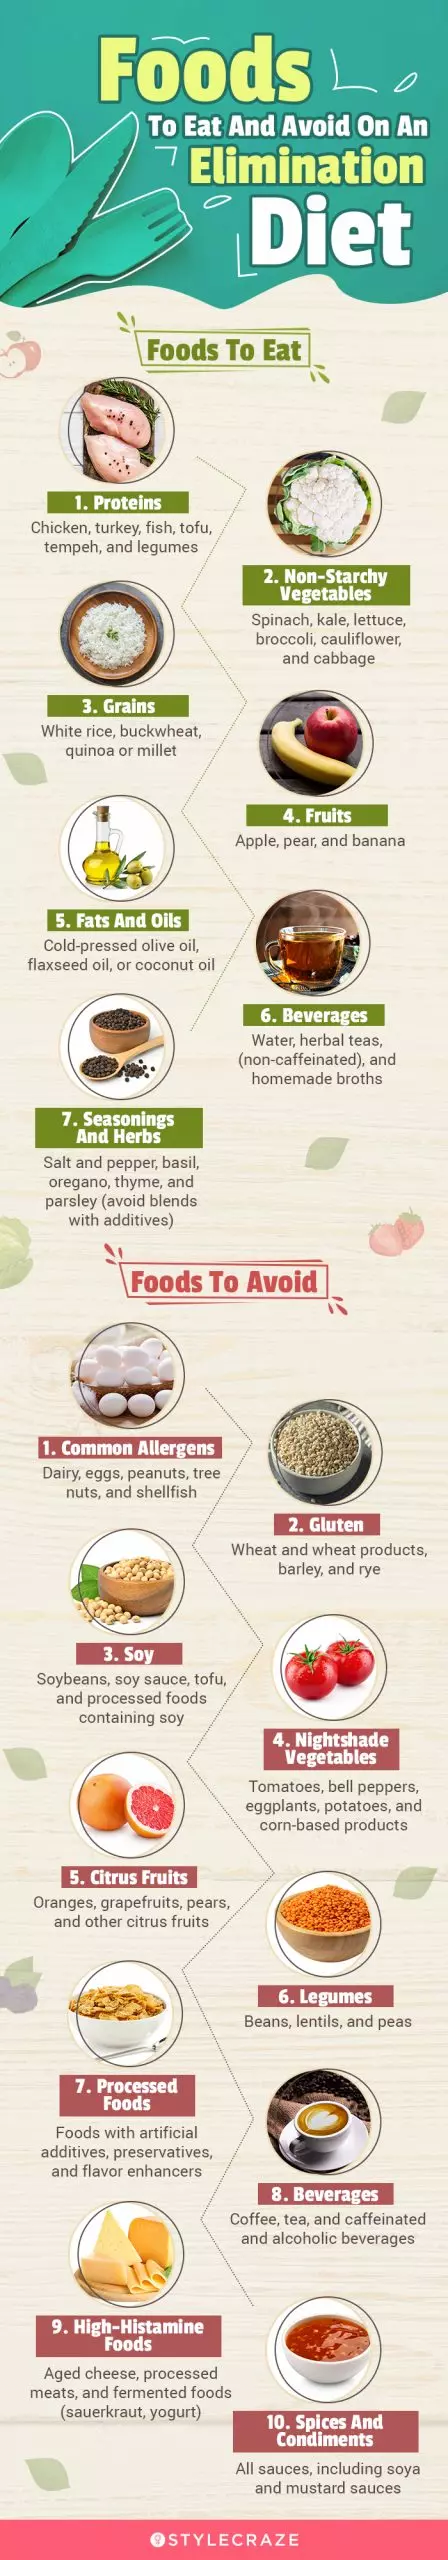 foods to eat and avoid on an elimination diet (infographic)